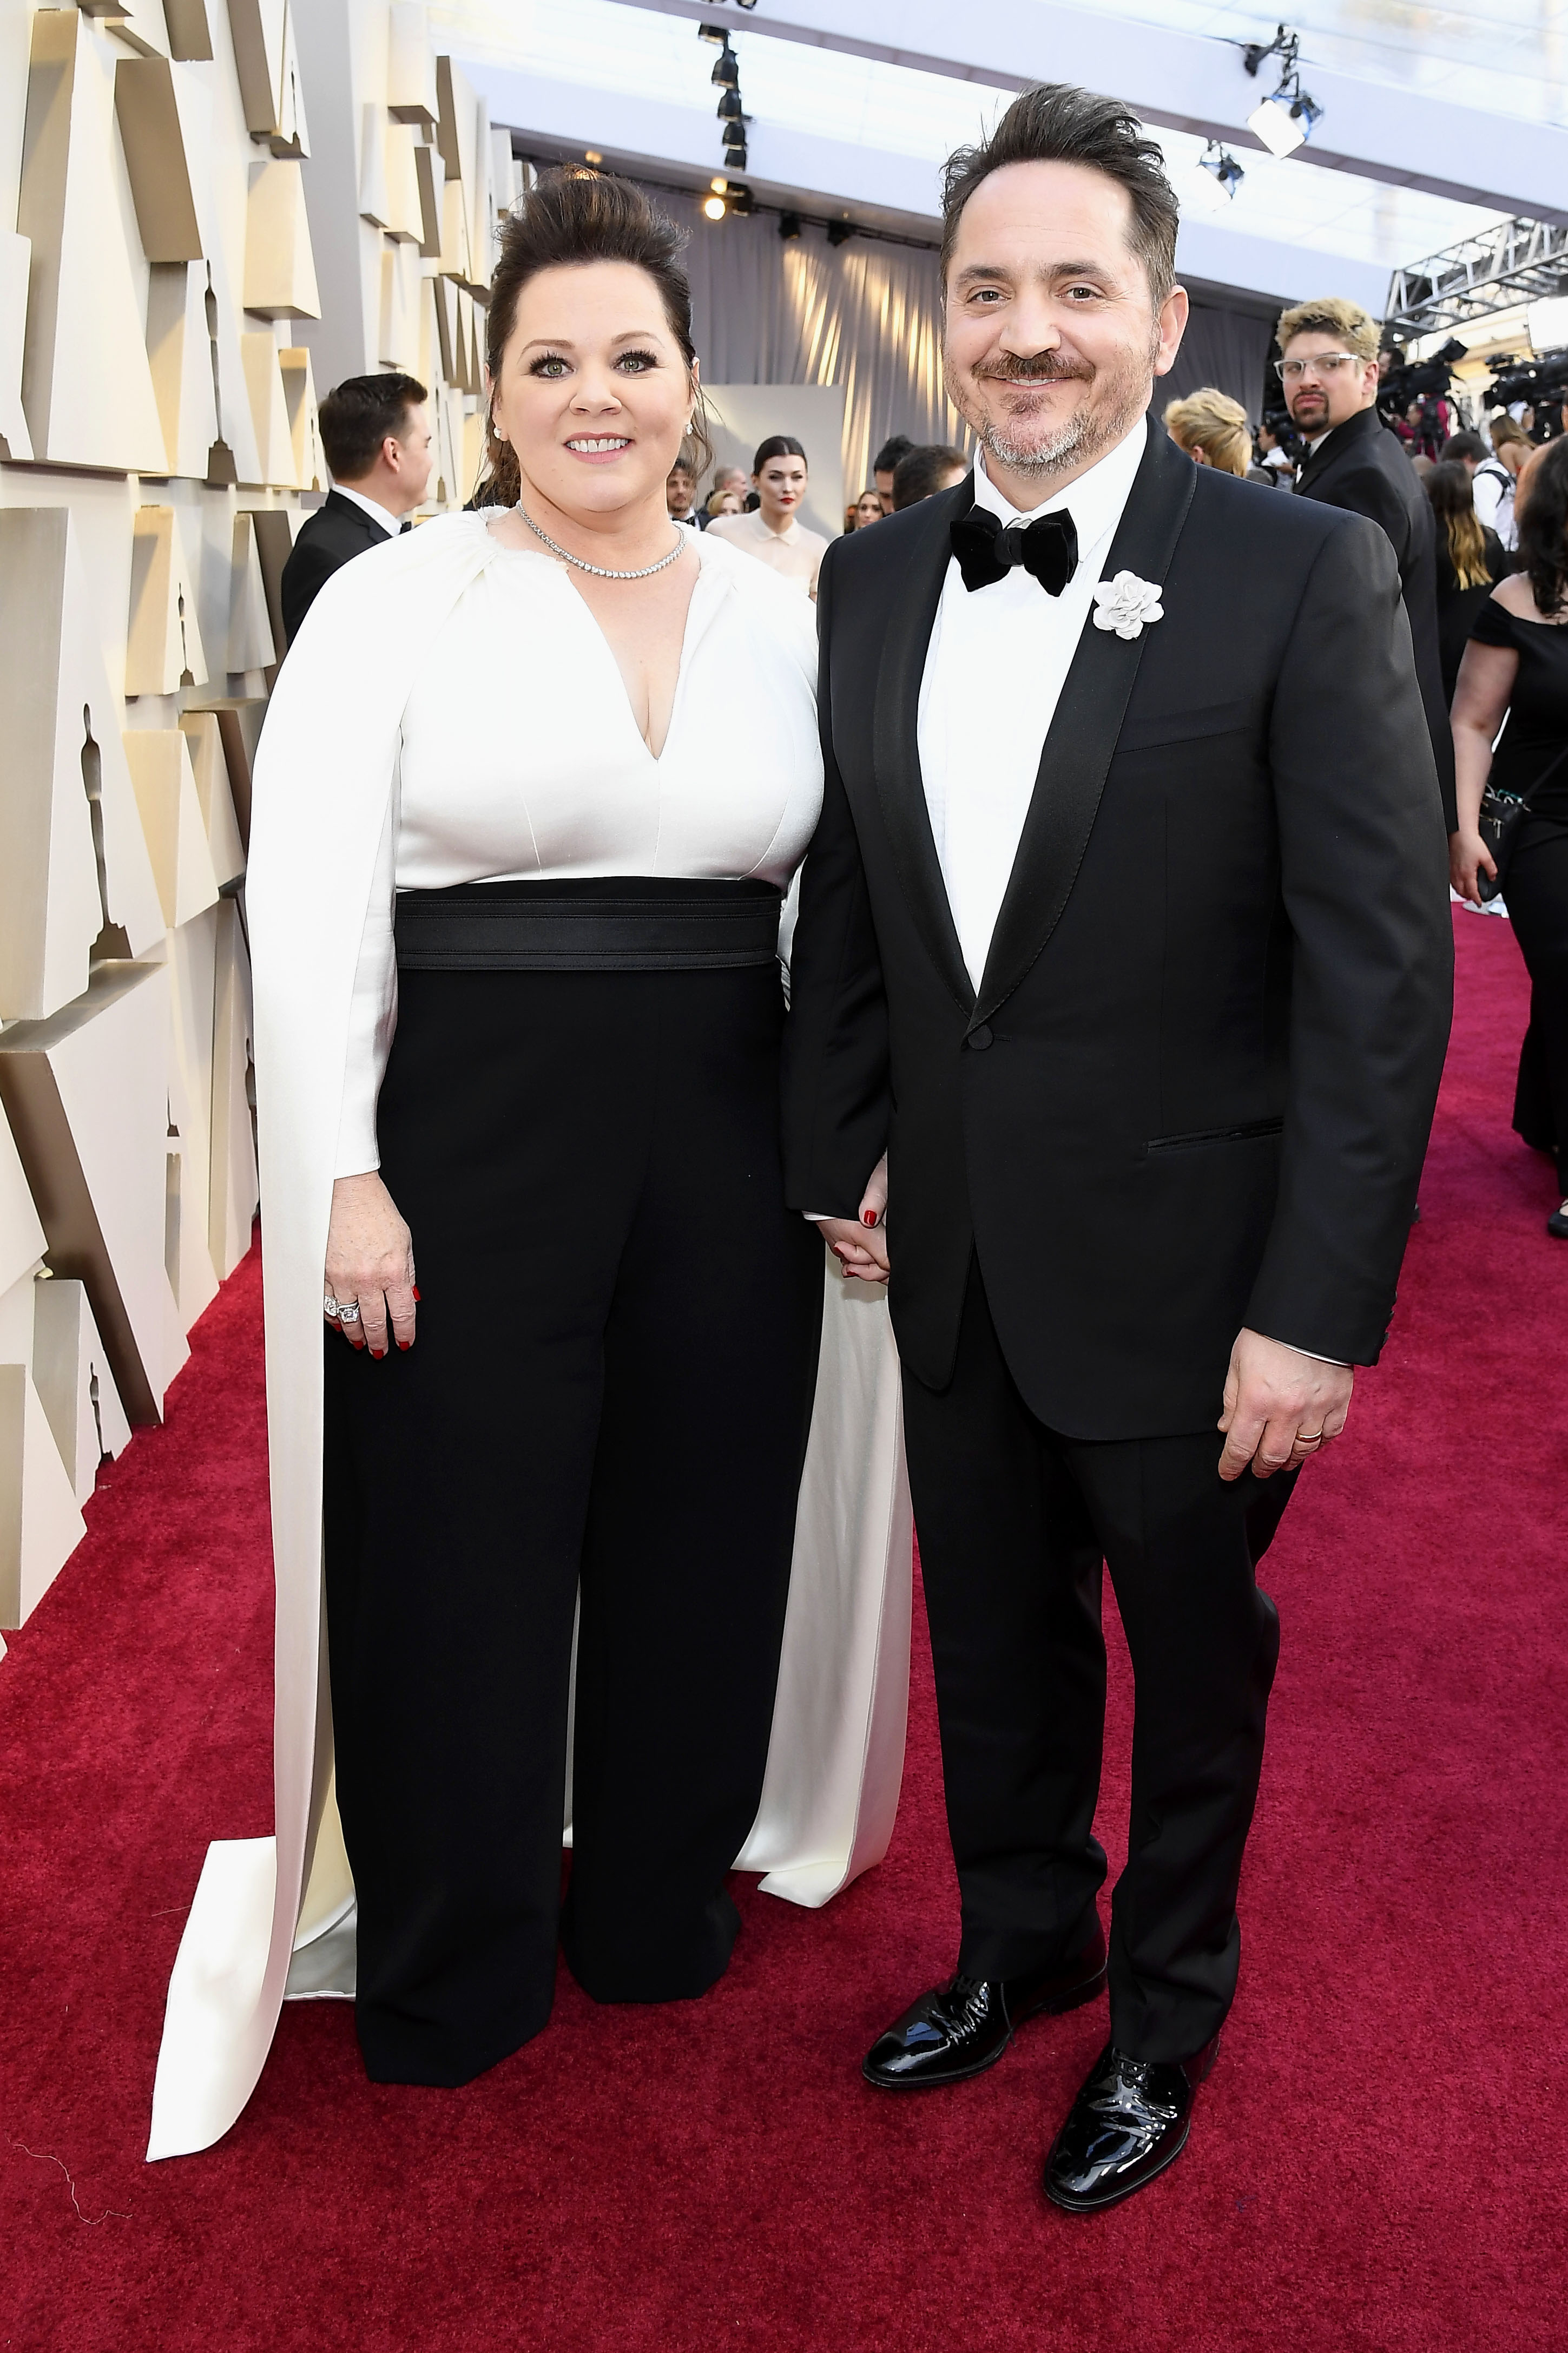 Ben Falcone and Melissa McCarthy in Hollywood, California on February 24, 2019 | Source: Getty Images